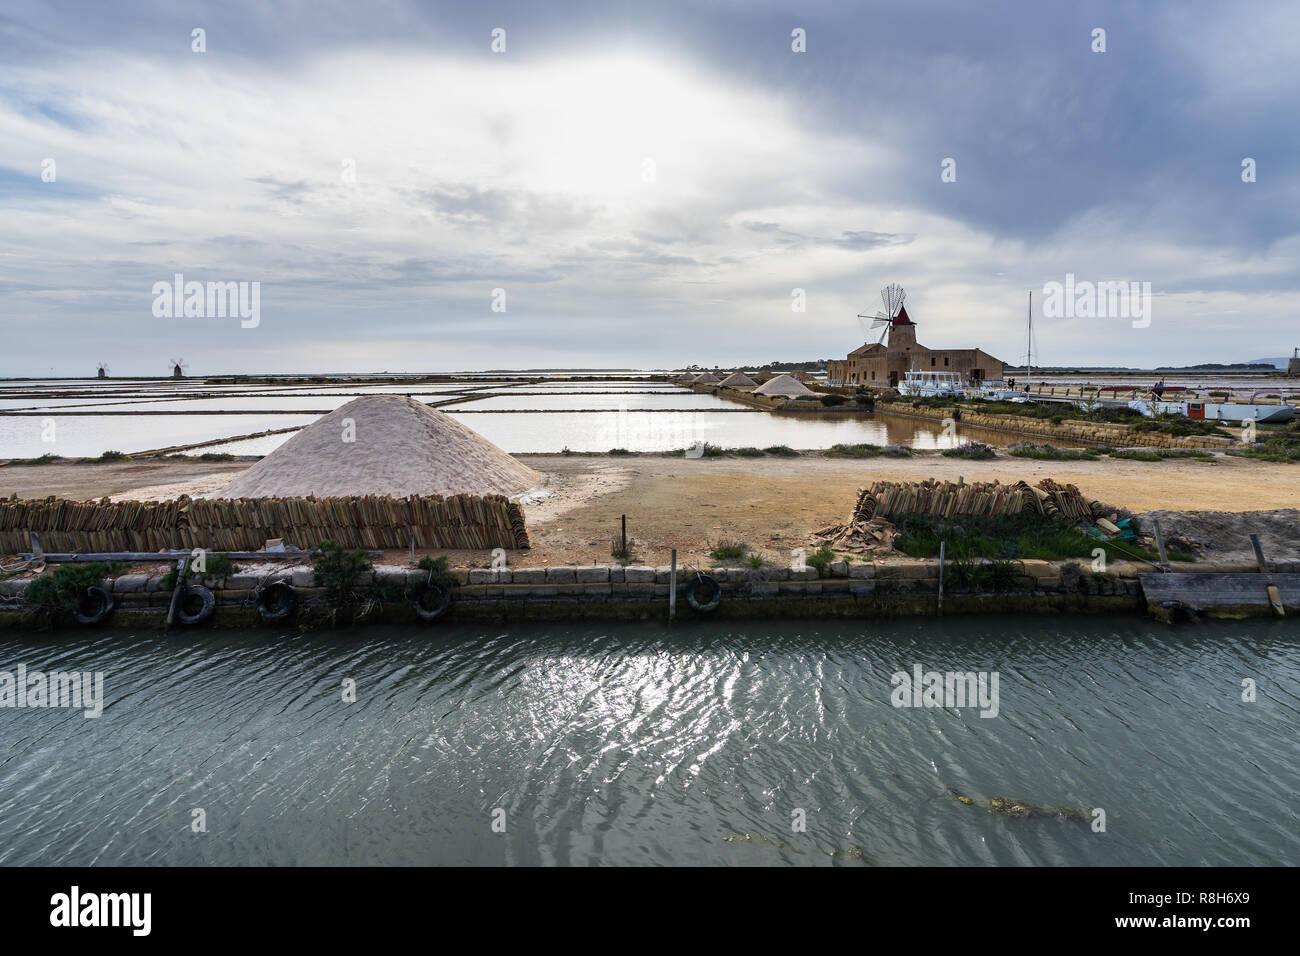 Natural reserve “Saline dello Stagnone” with salt evaporation pond and the old windmill in the background, Marsala, Sicily, Italy Stock Photo